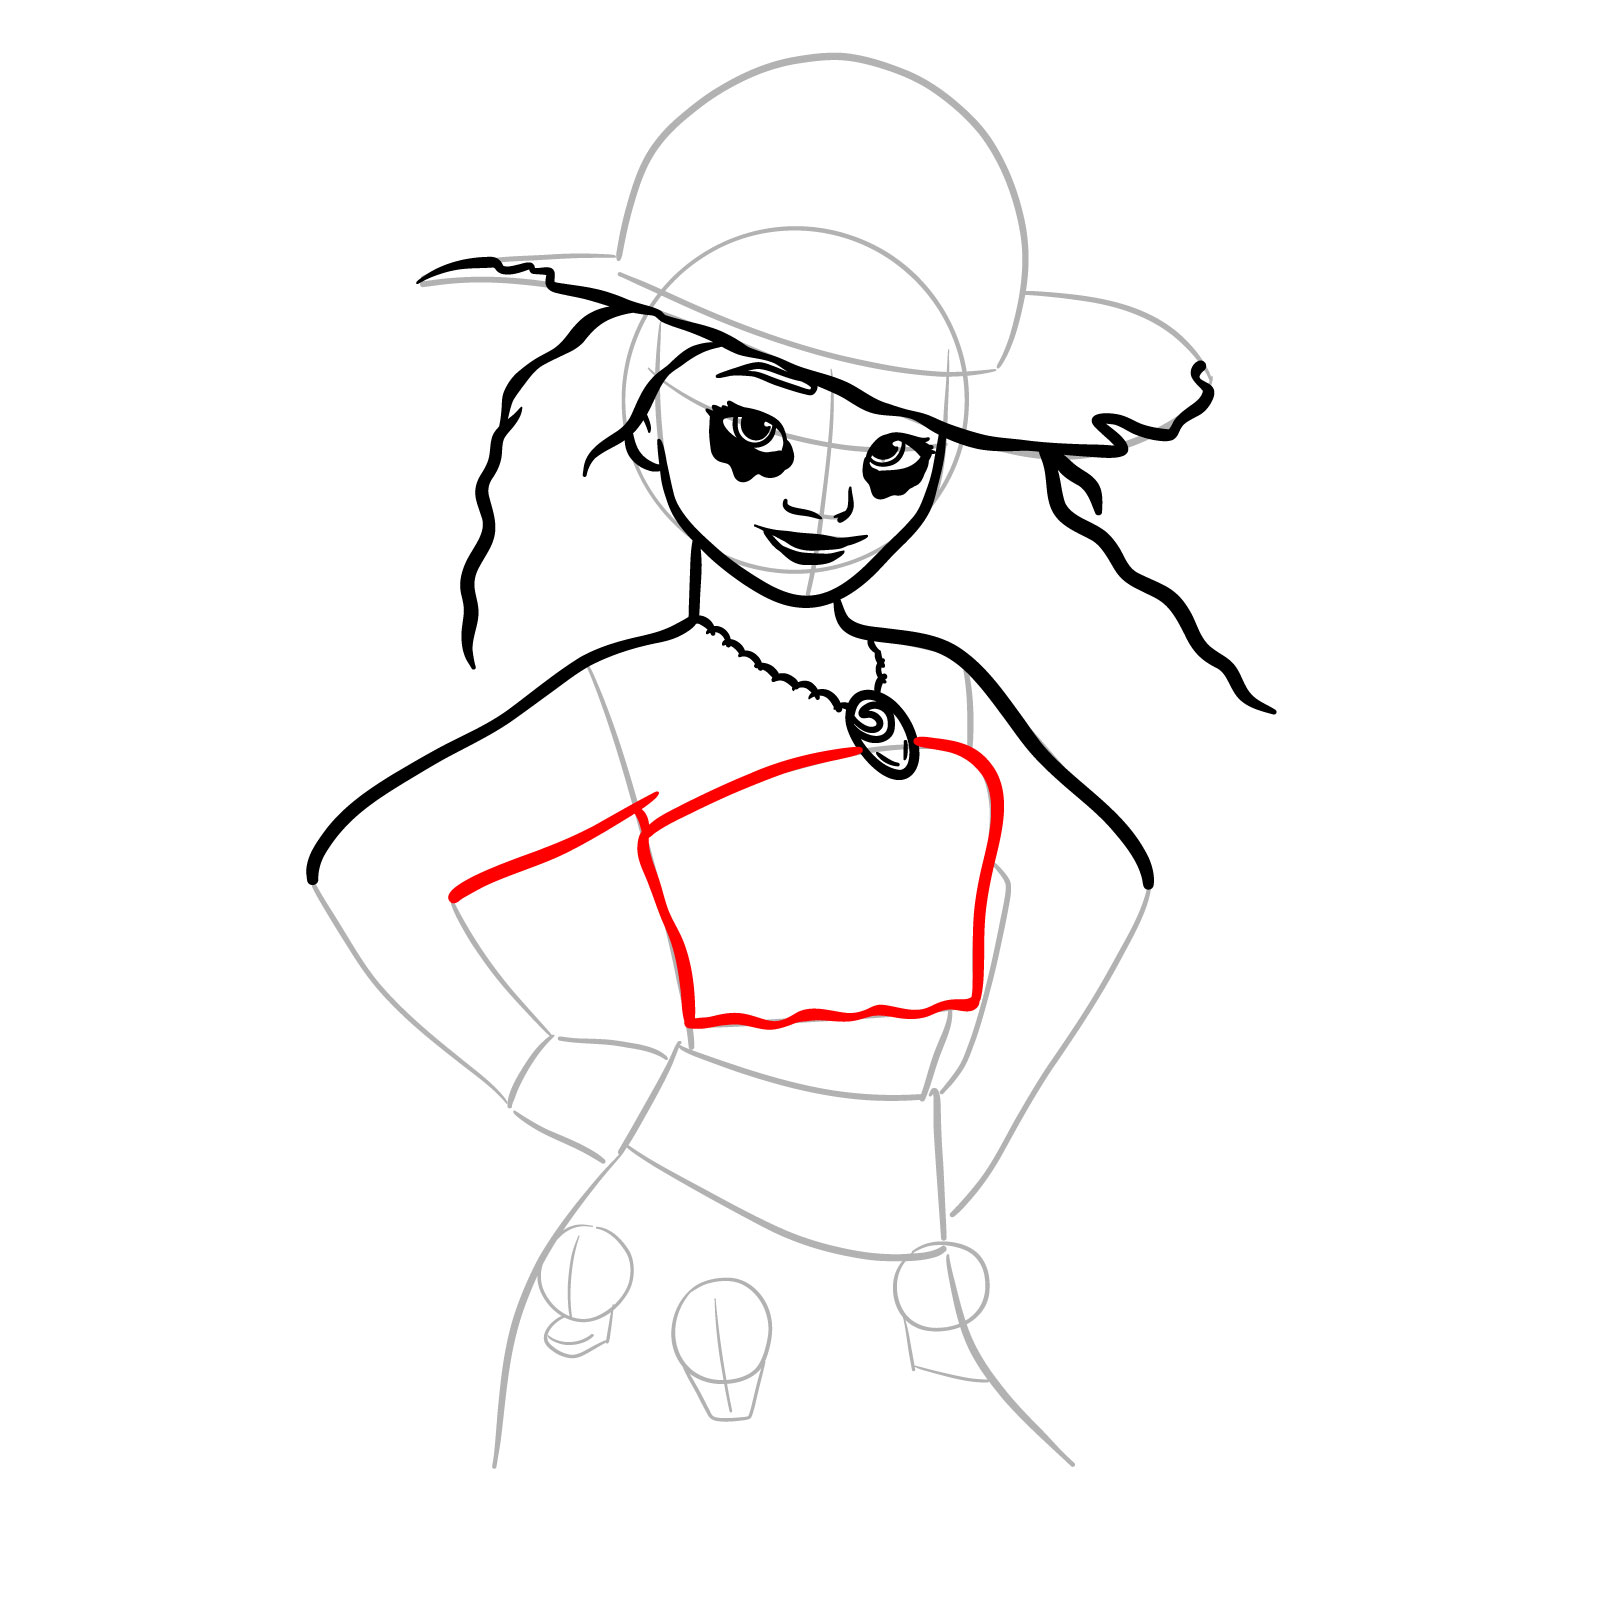 How to Draw Halloween Moana as a Staw Hat Pirate - step 14